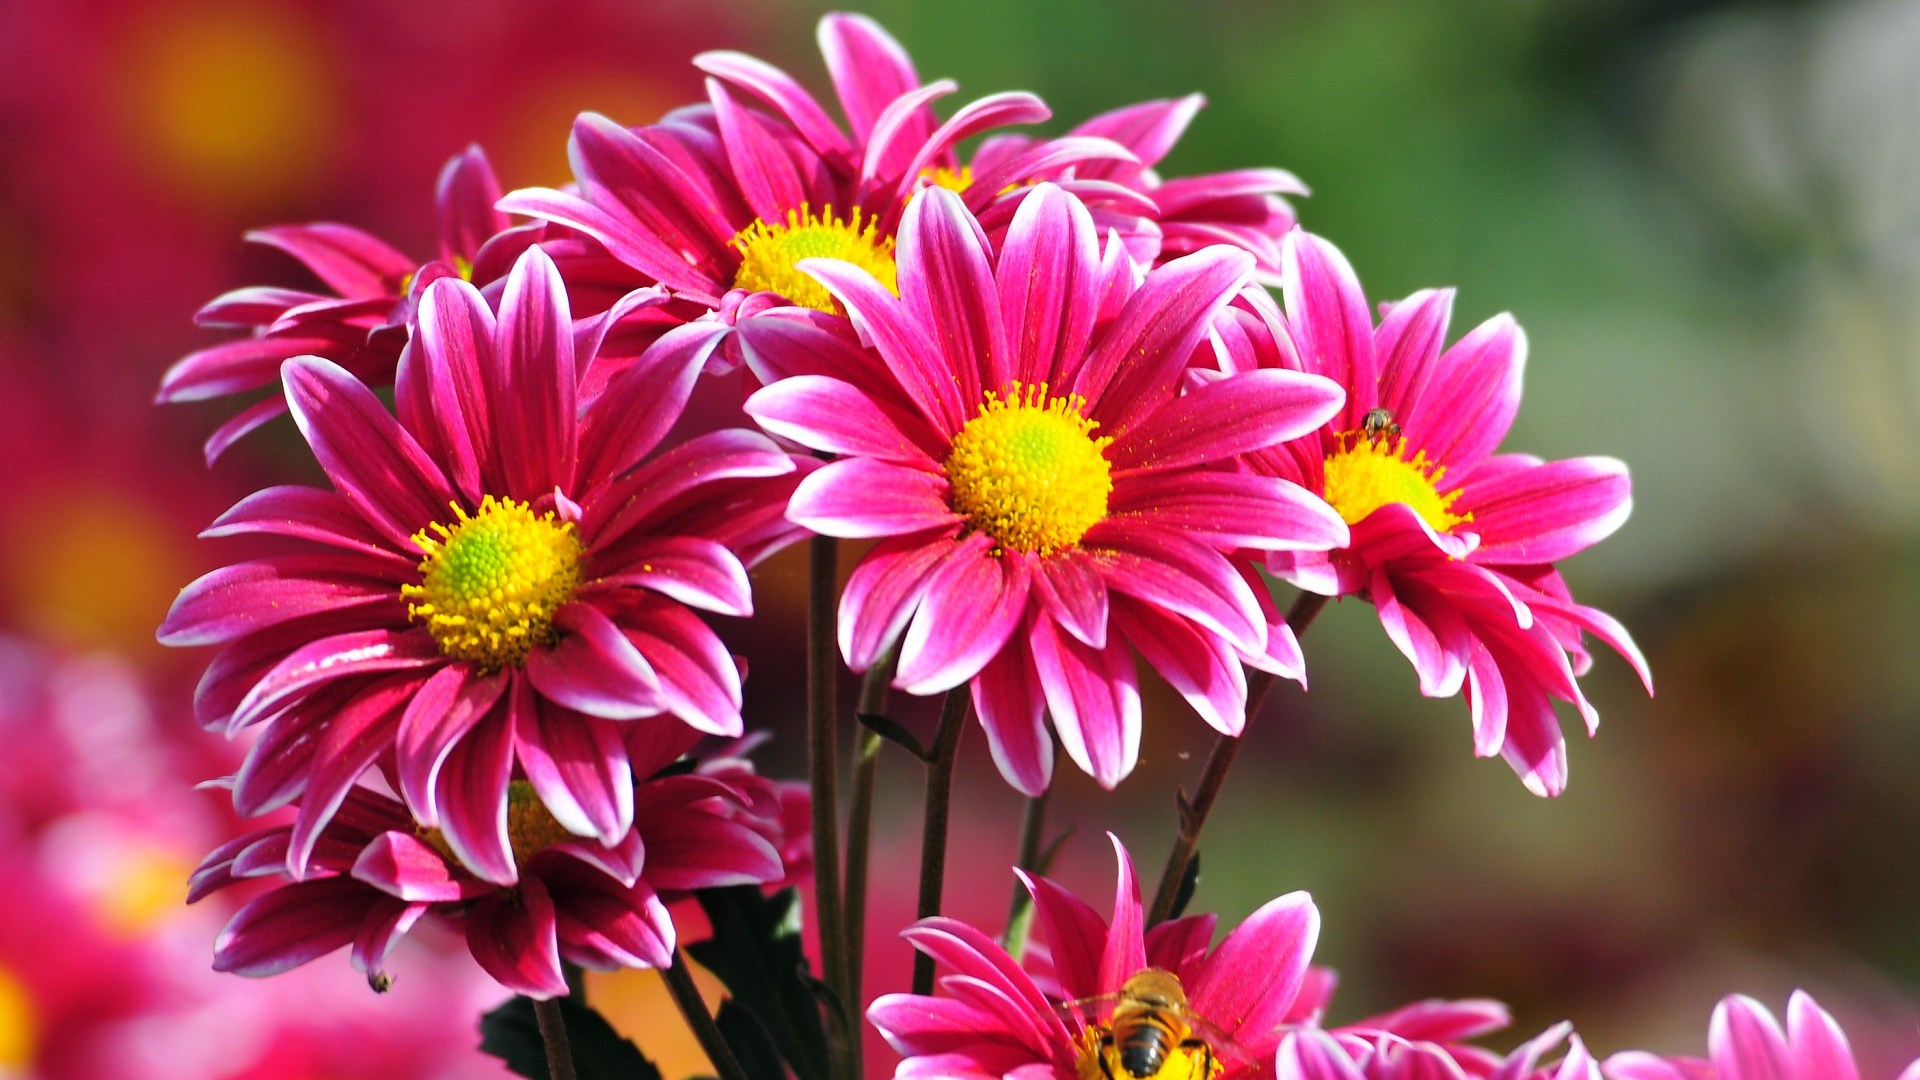 Beautiful Flowers Wallpapers, Pictures, Images
